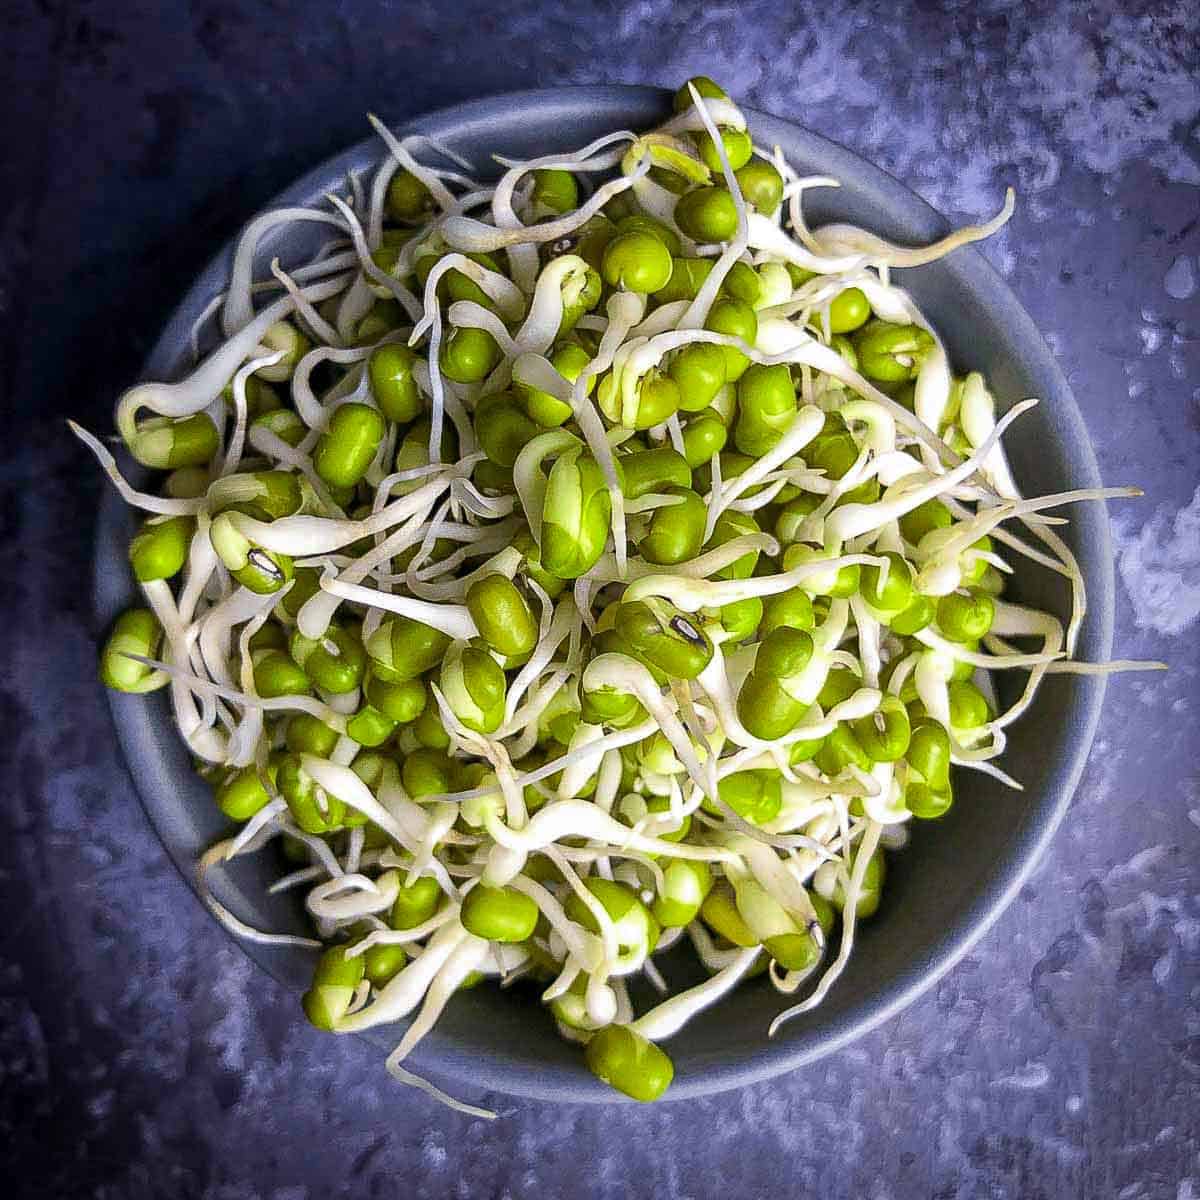 Mung bean sprouts in a grey bowl.